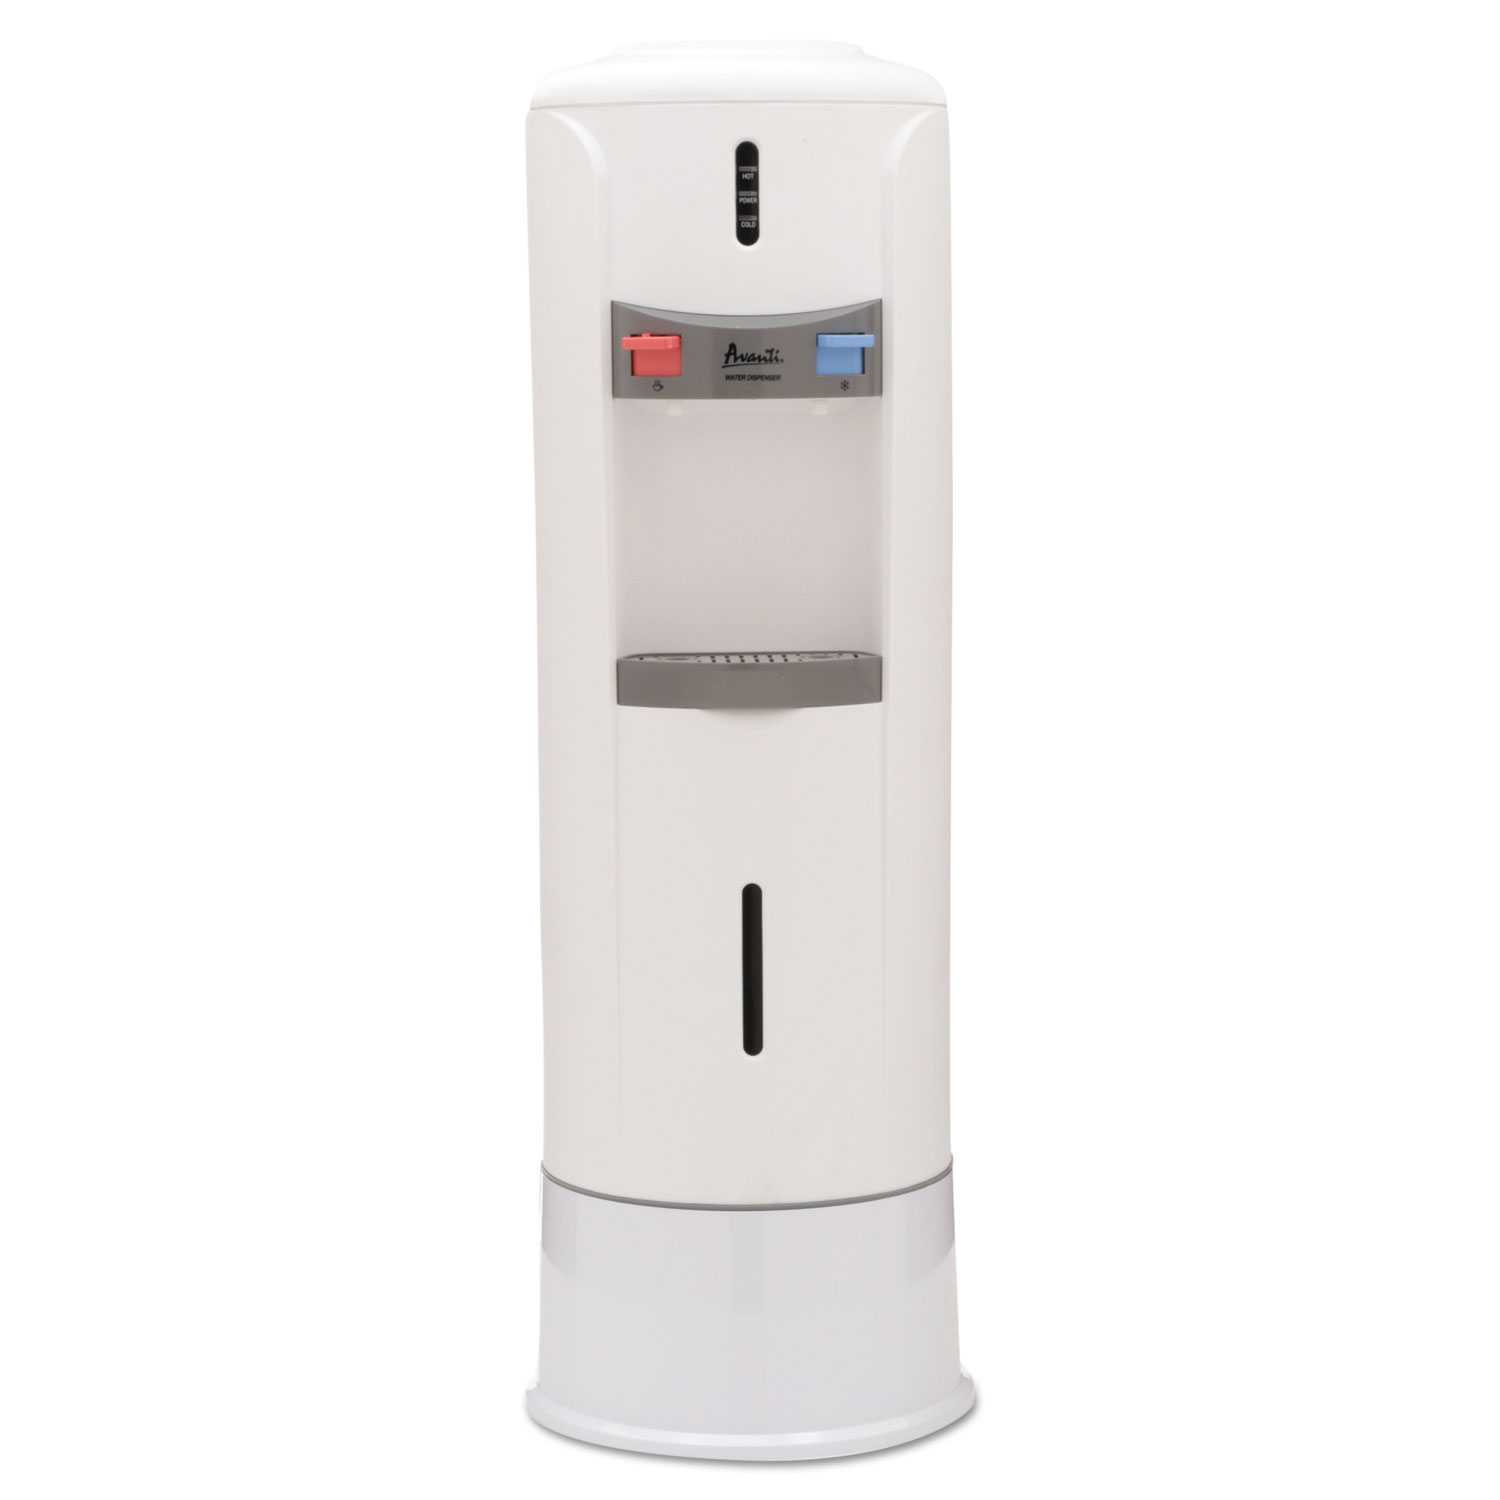 Hot and Cold Water Dispenser, 12 3/4 dia. x 39h, Ivory White